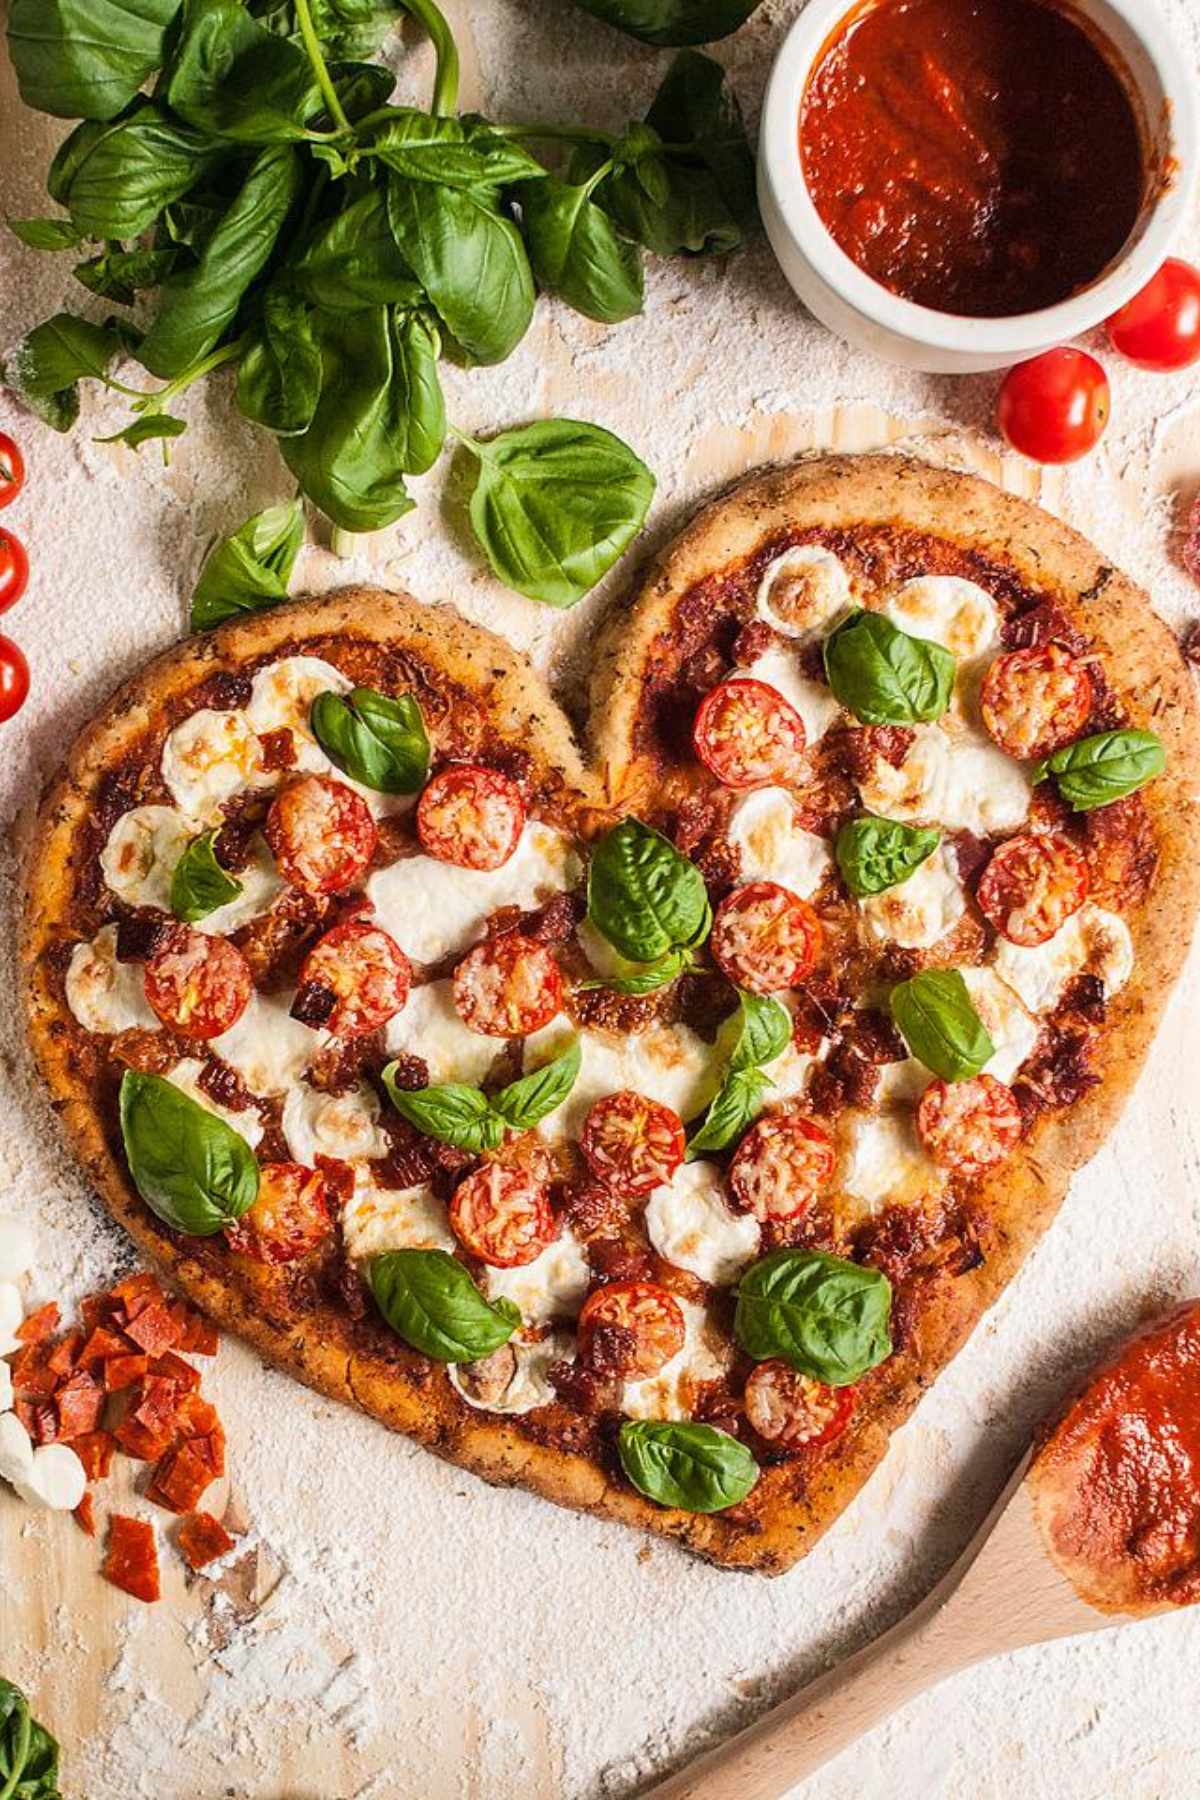 Heart shaped gluten free pizza with homemade gluten free pizza crust topped with cheese, basil leaves and cherry tomatoes.